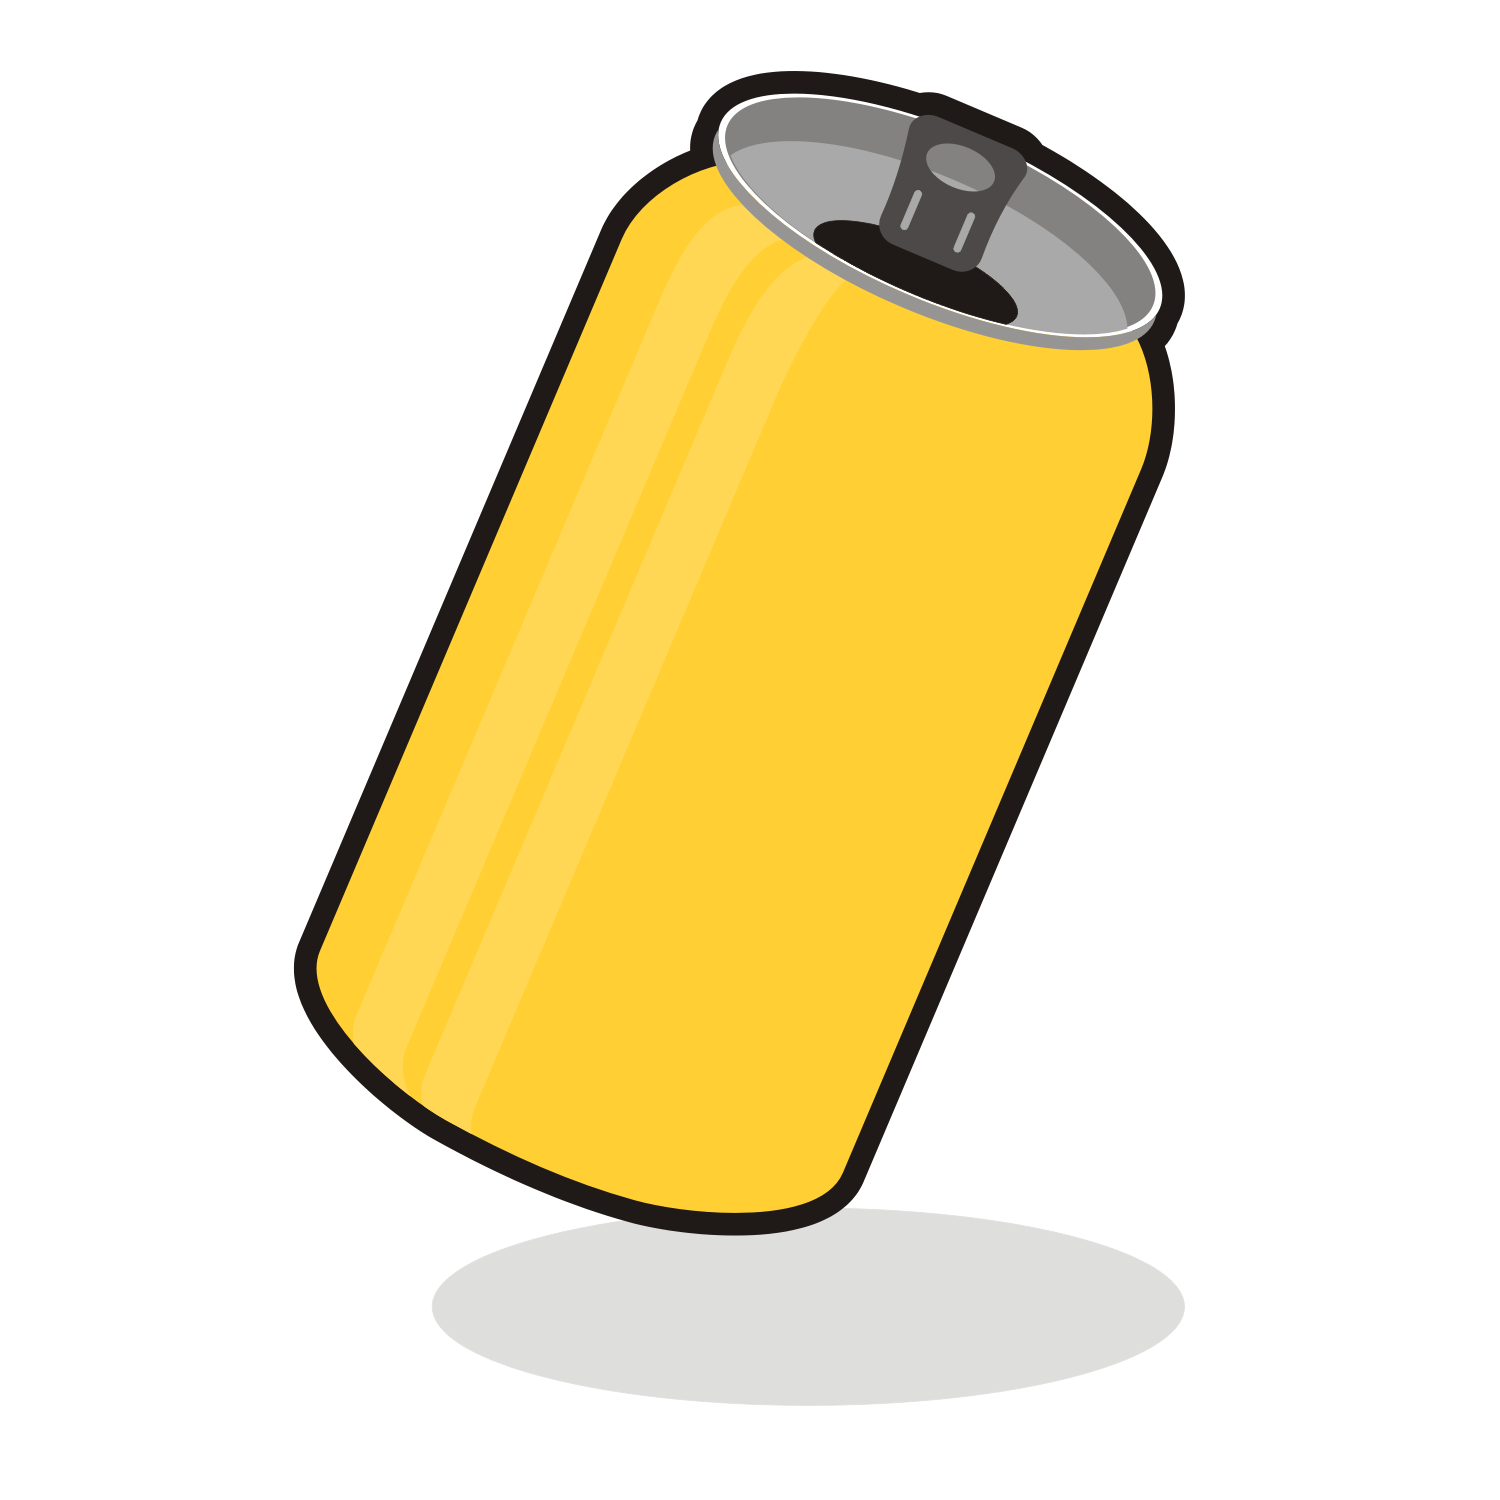 Clip Arts Related To : coke can clipart. view all Pop Can Cliparts). 